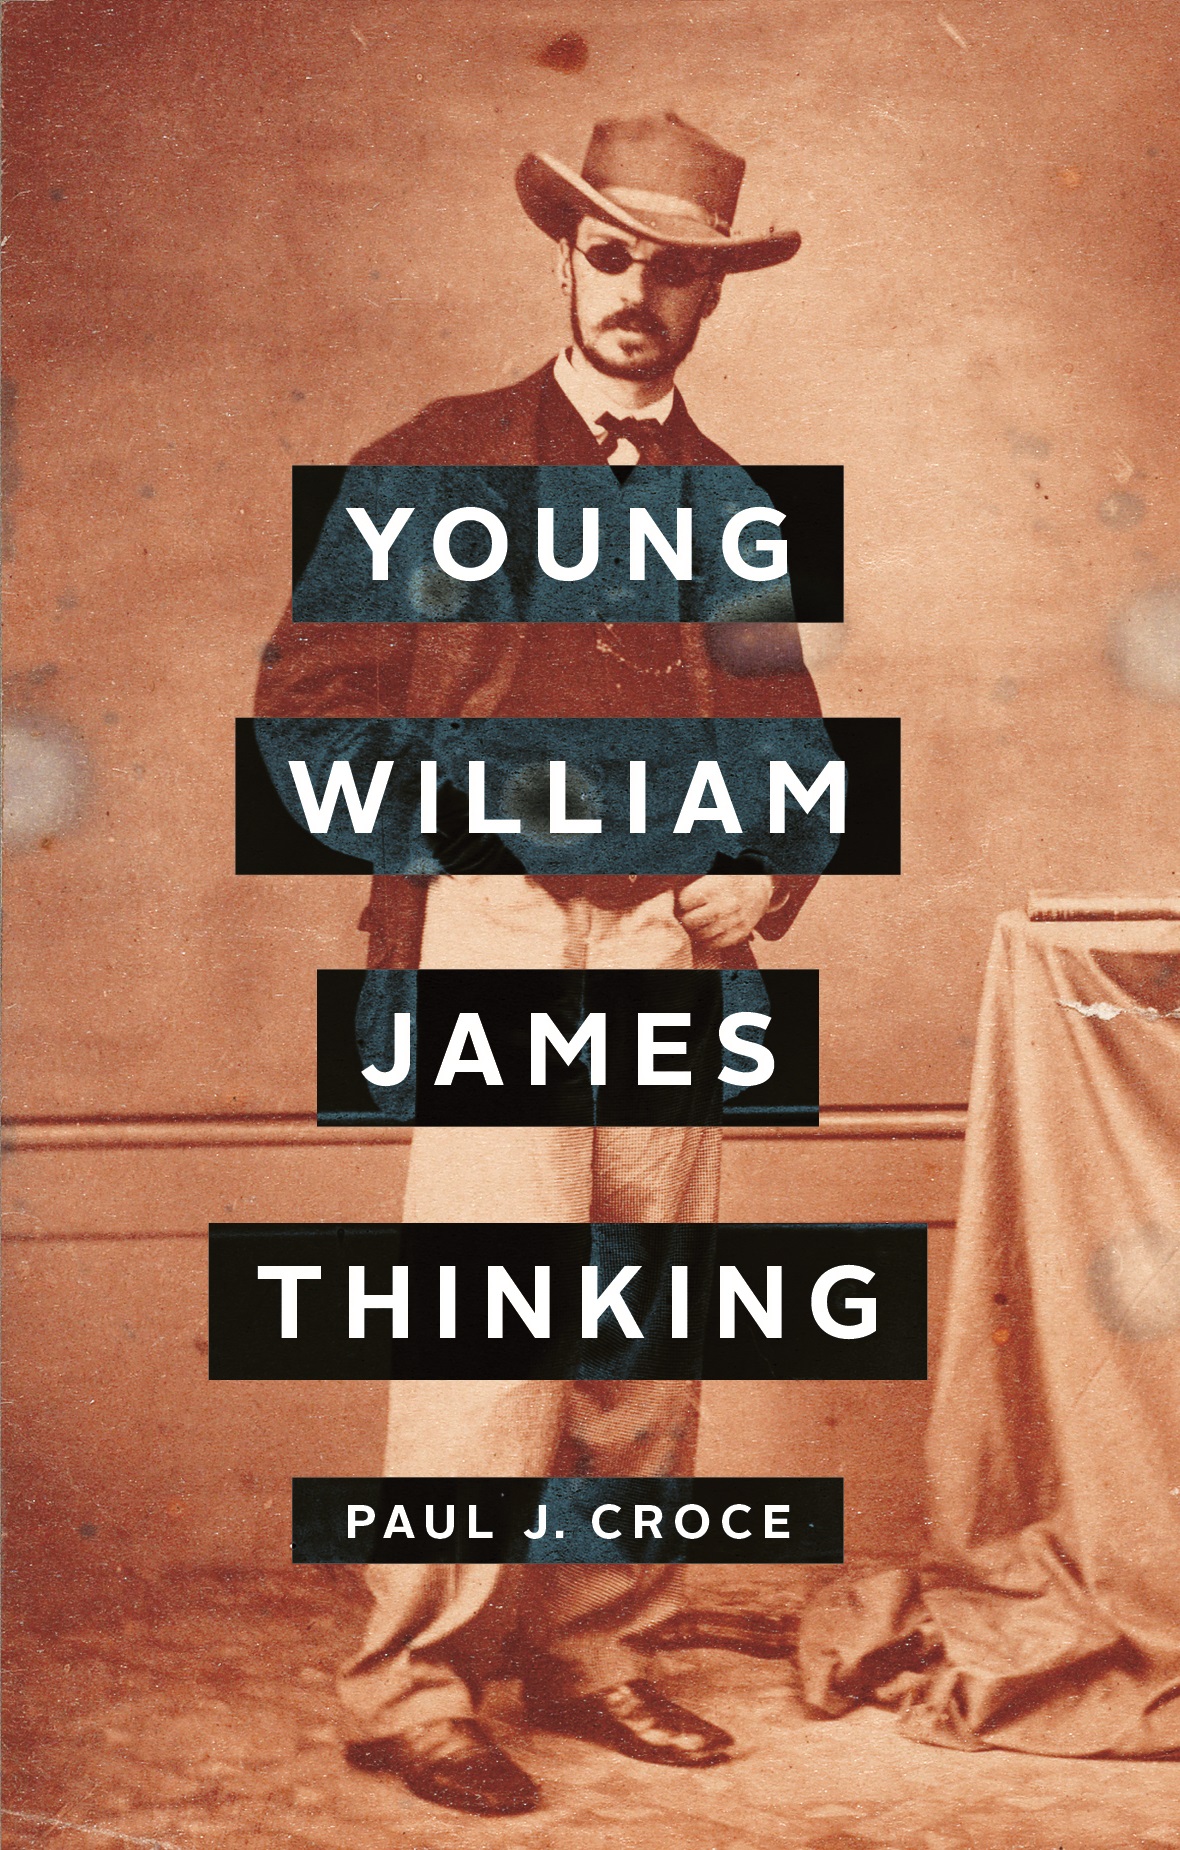 Author, Paul J. Croce's book entitled Young William James Thinking (2017)